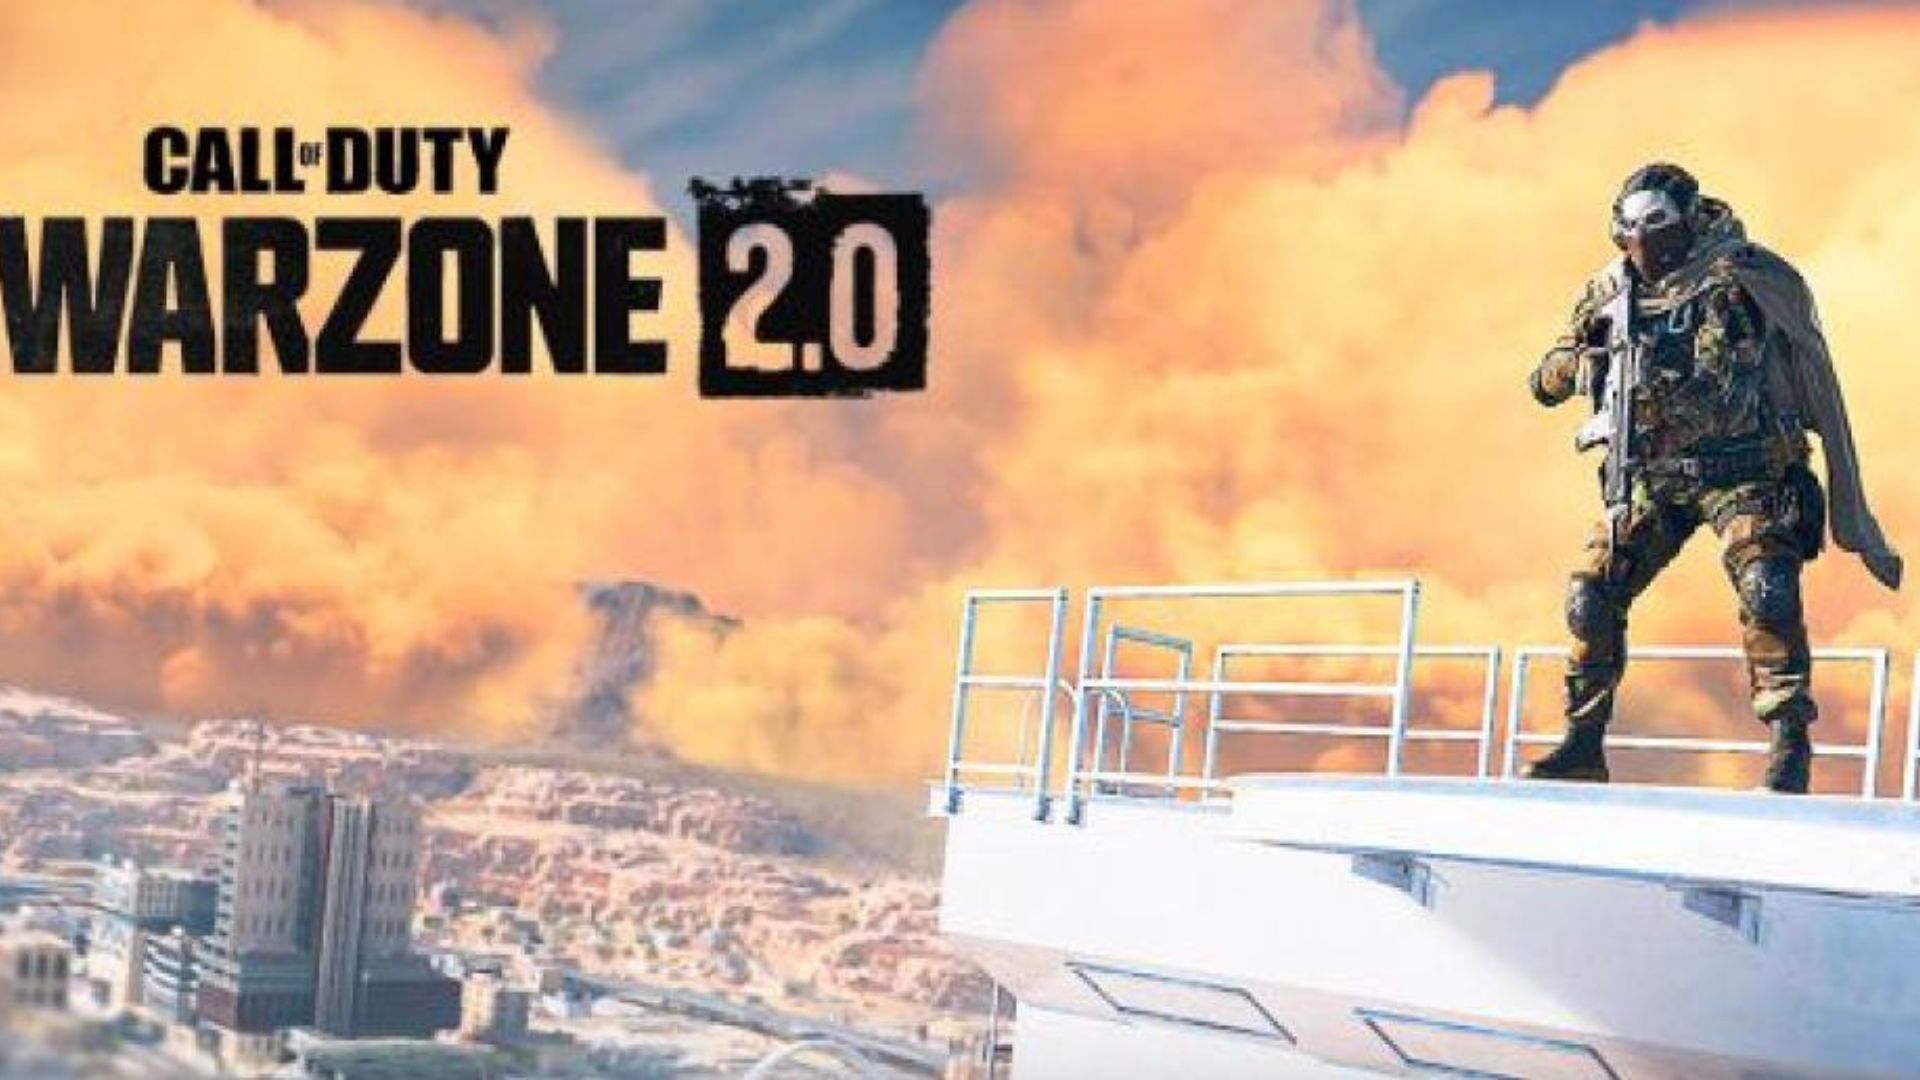 Didn't they promise that Warzone 2.0 would be a separate app from